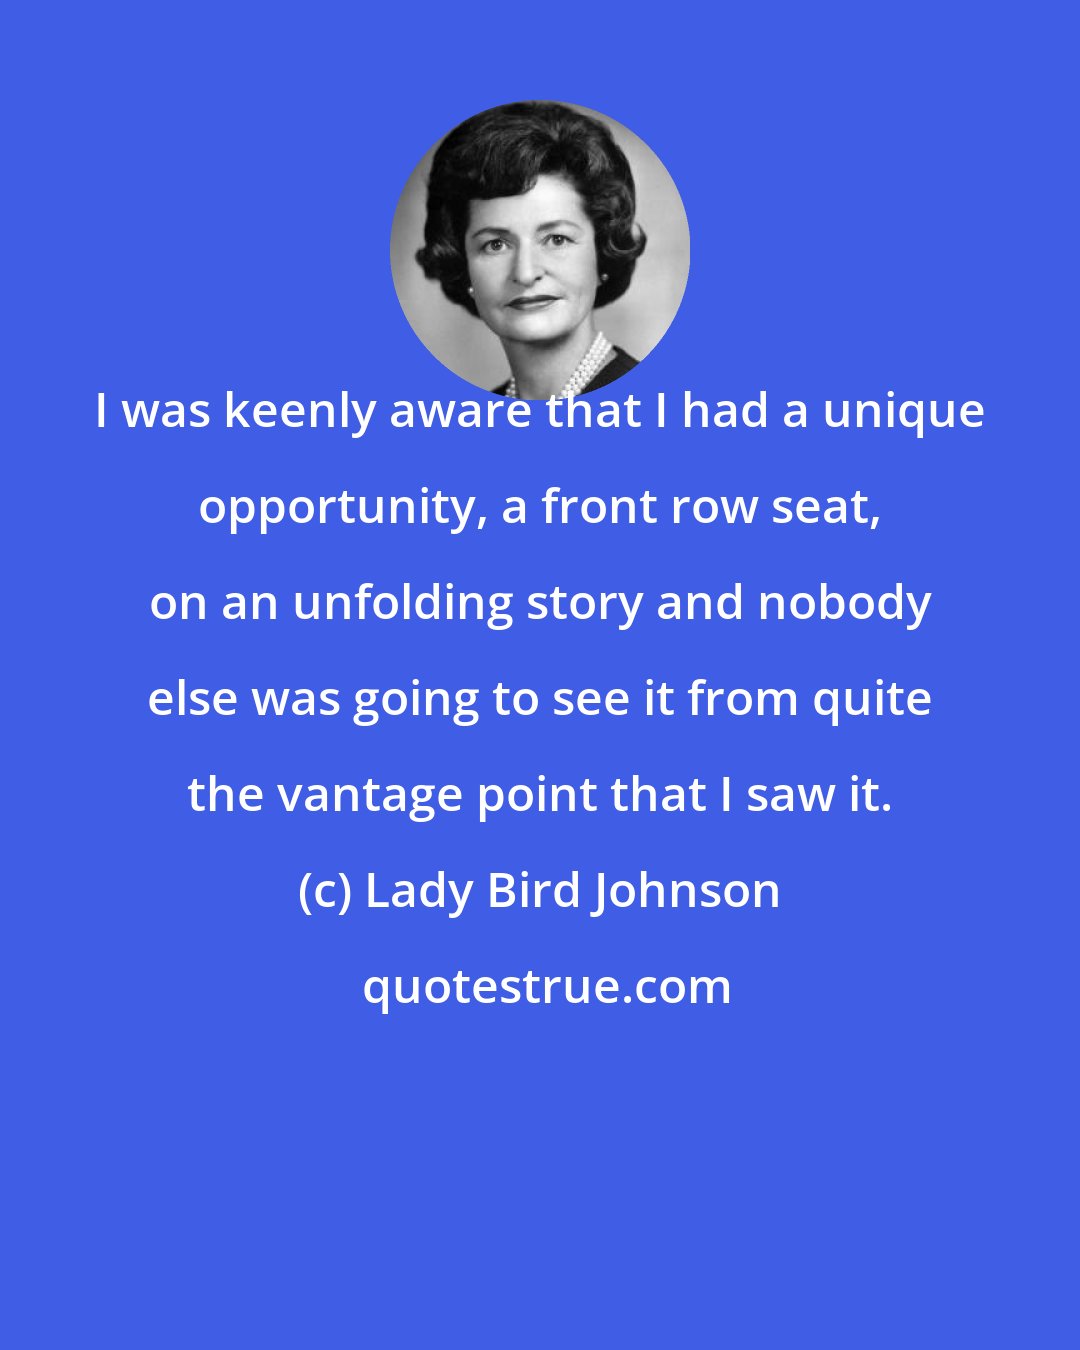 Lady Bird Johnson: I was keenly aware that I had a unique opportunity, a front row seat, on an unfolding story and nobody else was going to see it from quite the vantage point that I saw it.